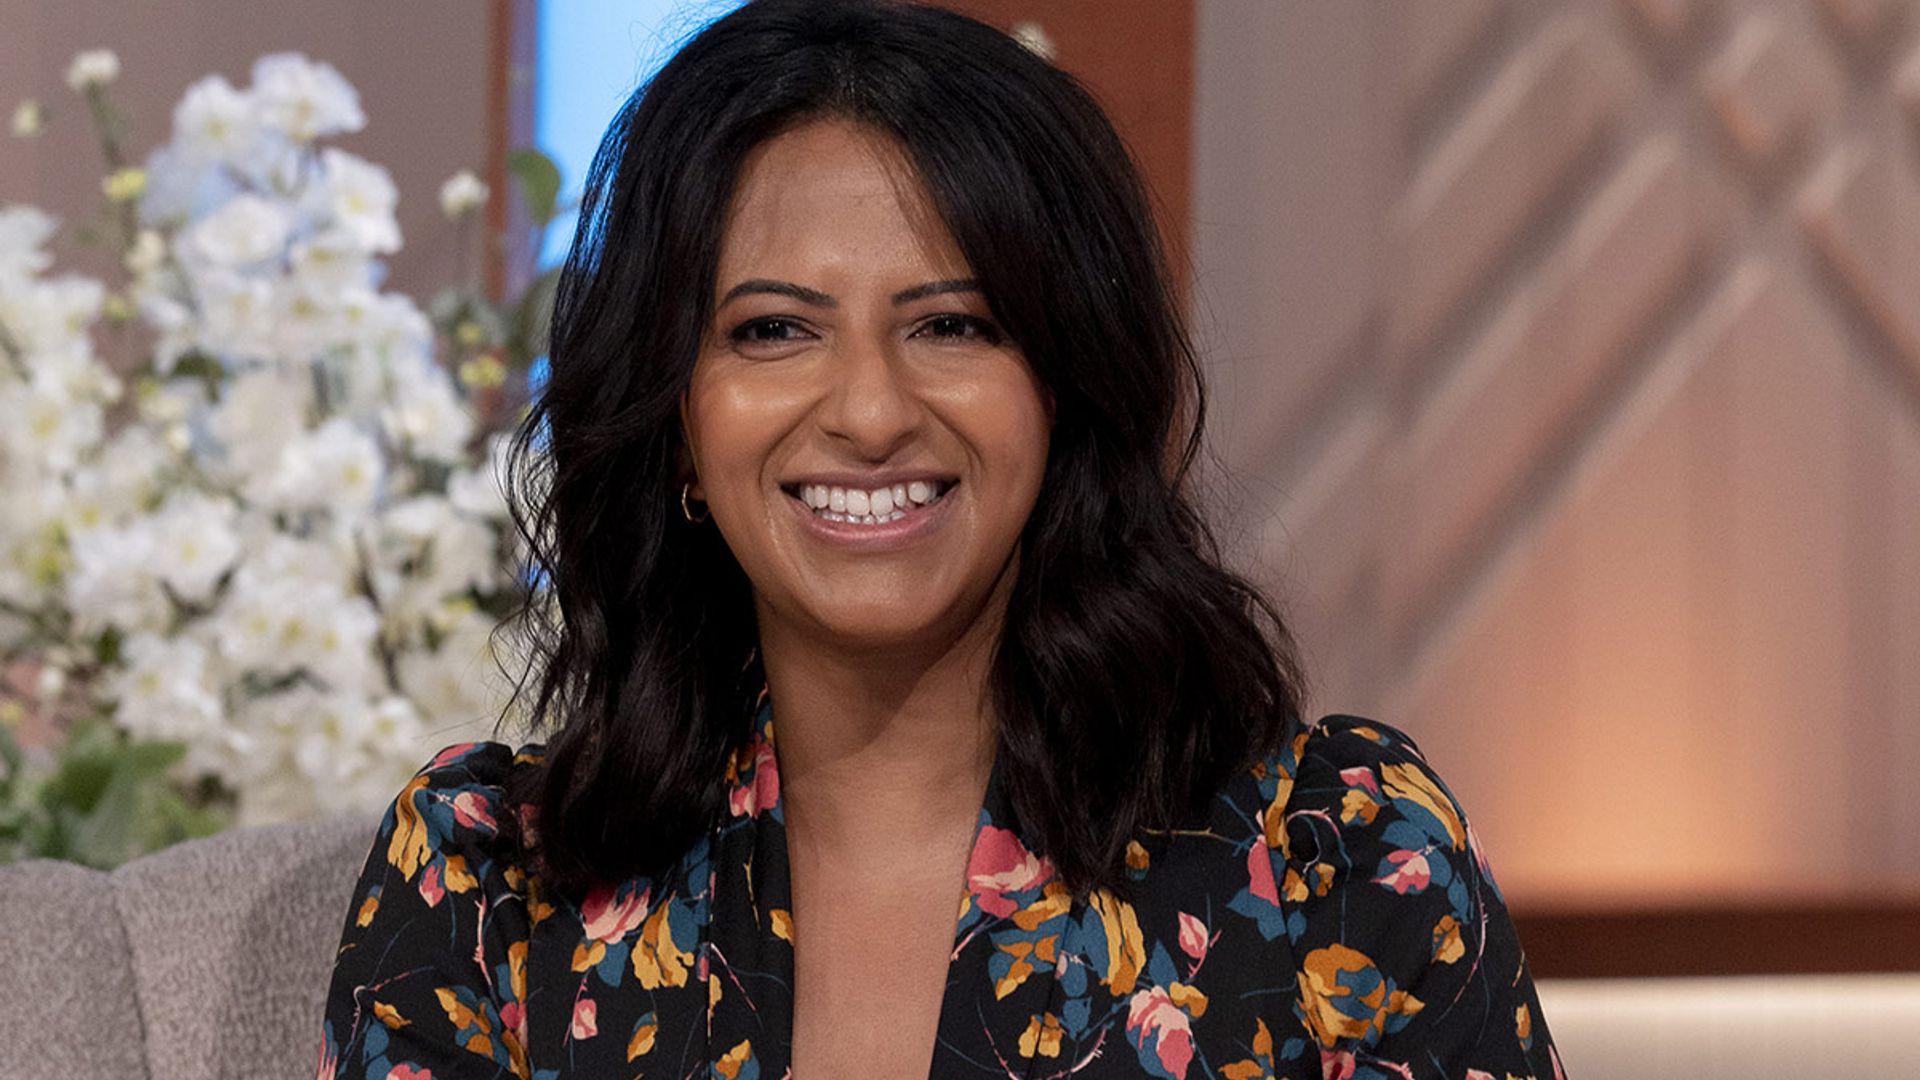 Ranvir Singh confirms new romance – and they met on Strictly